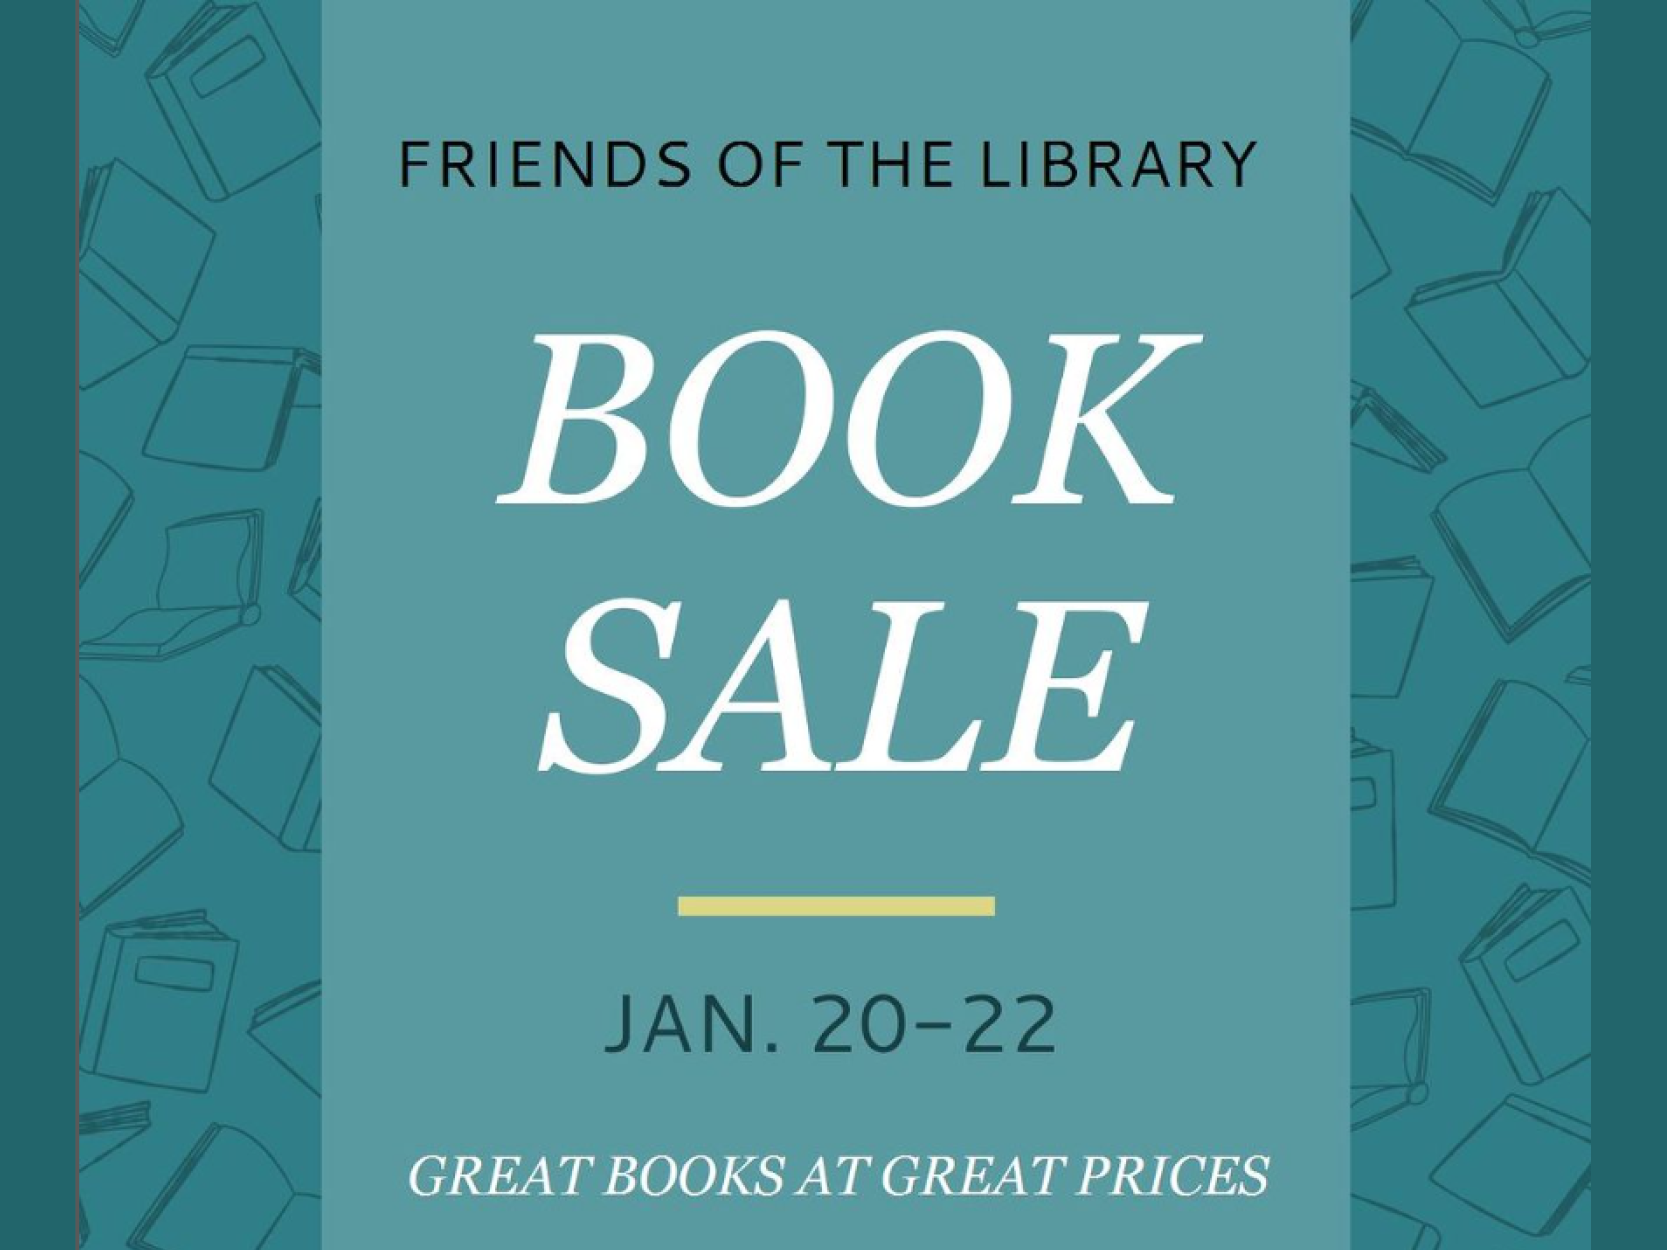 Friends of the Library Book Sale - Bradford News